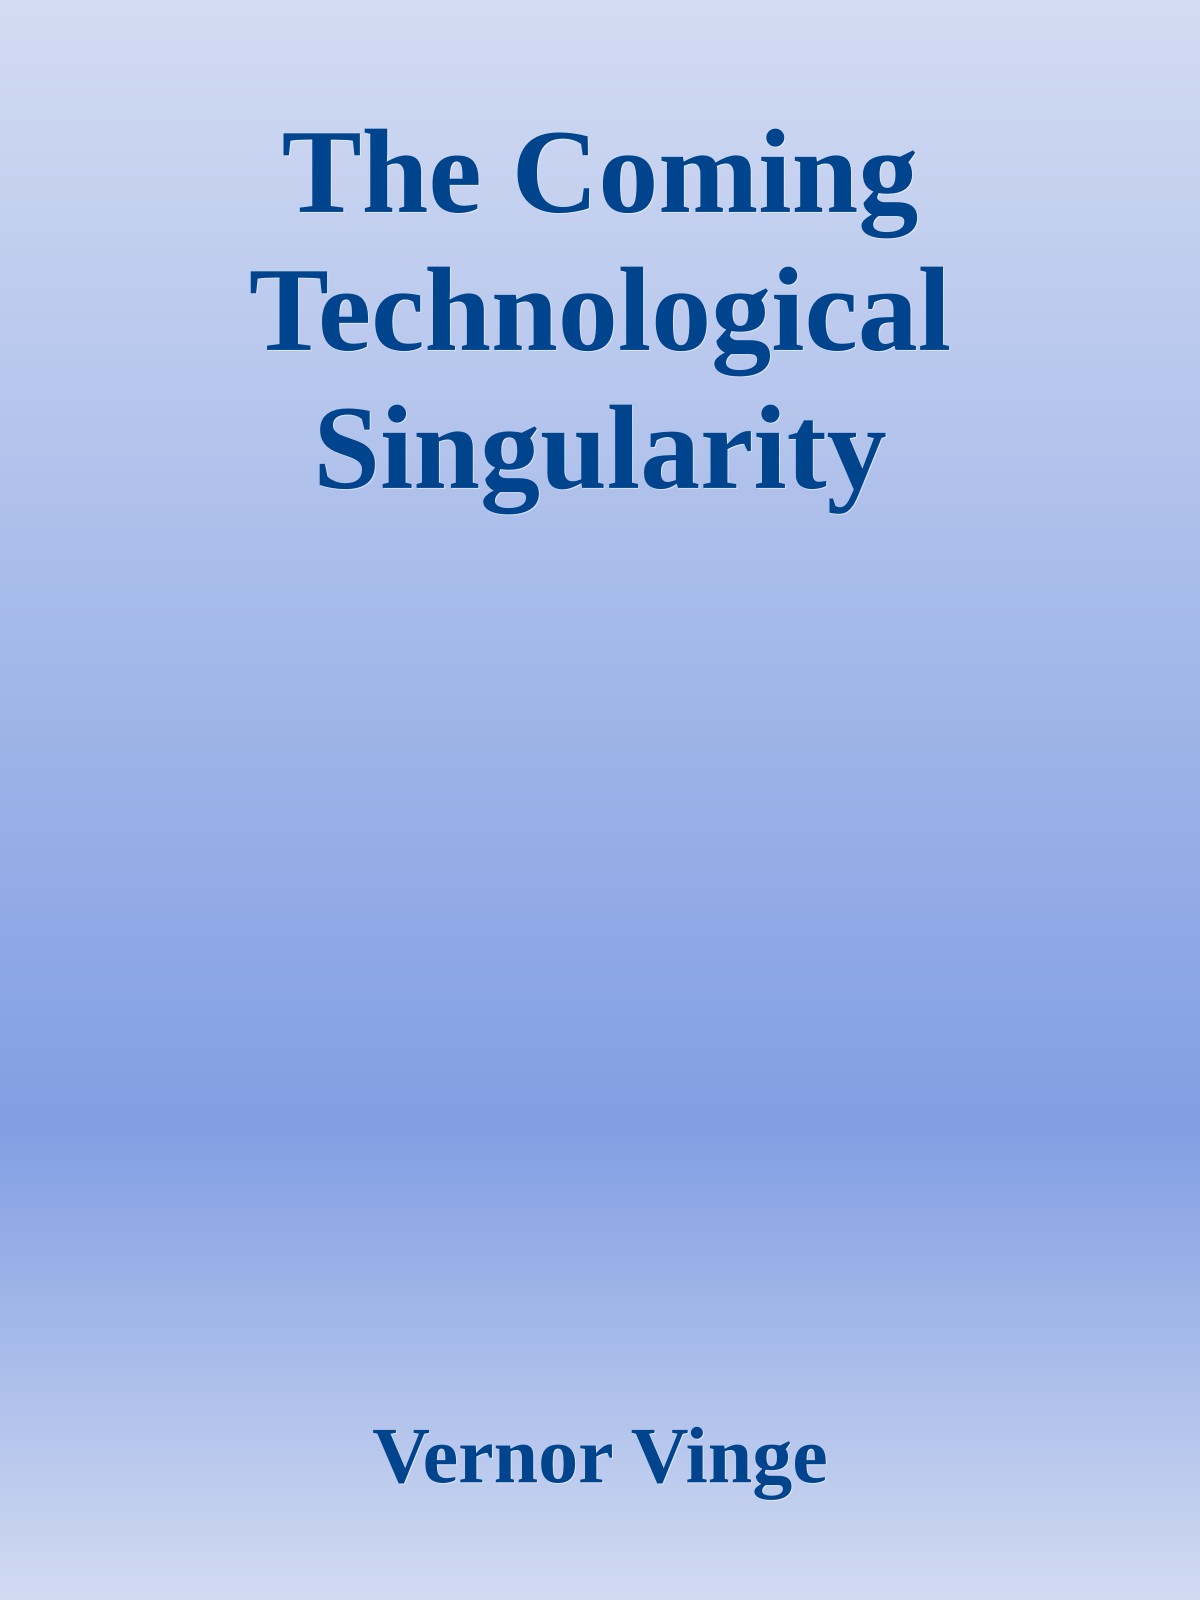 The Coming Technological Singularity